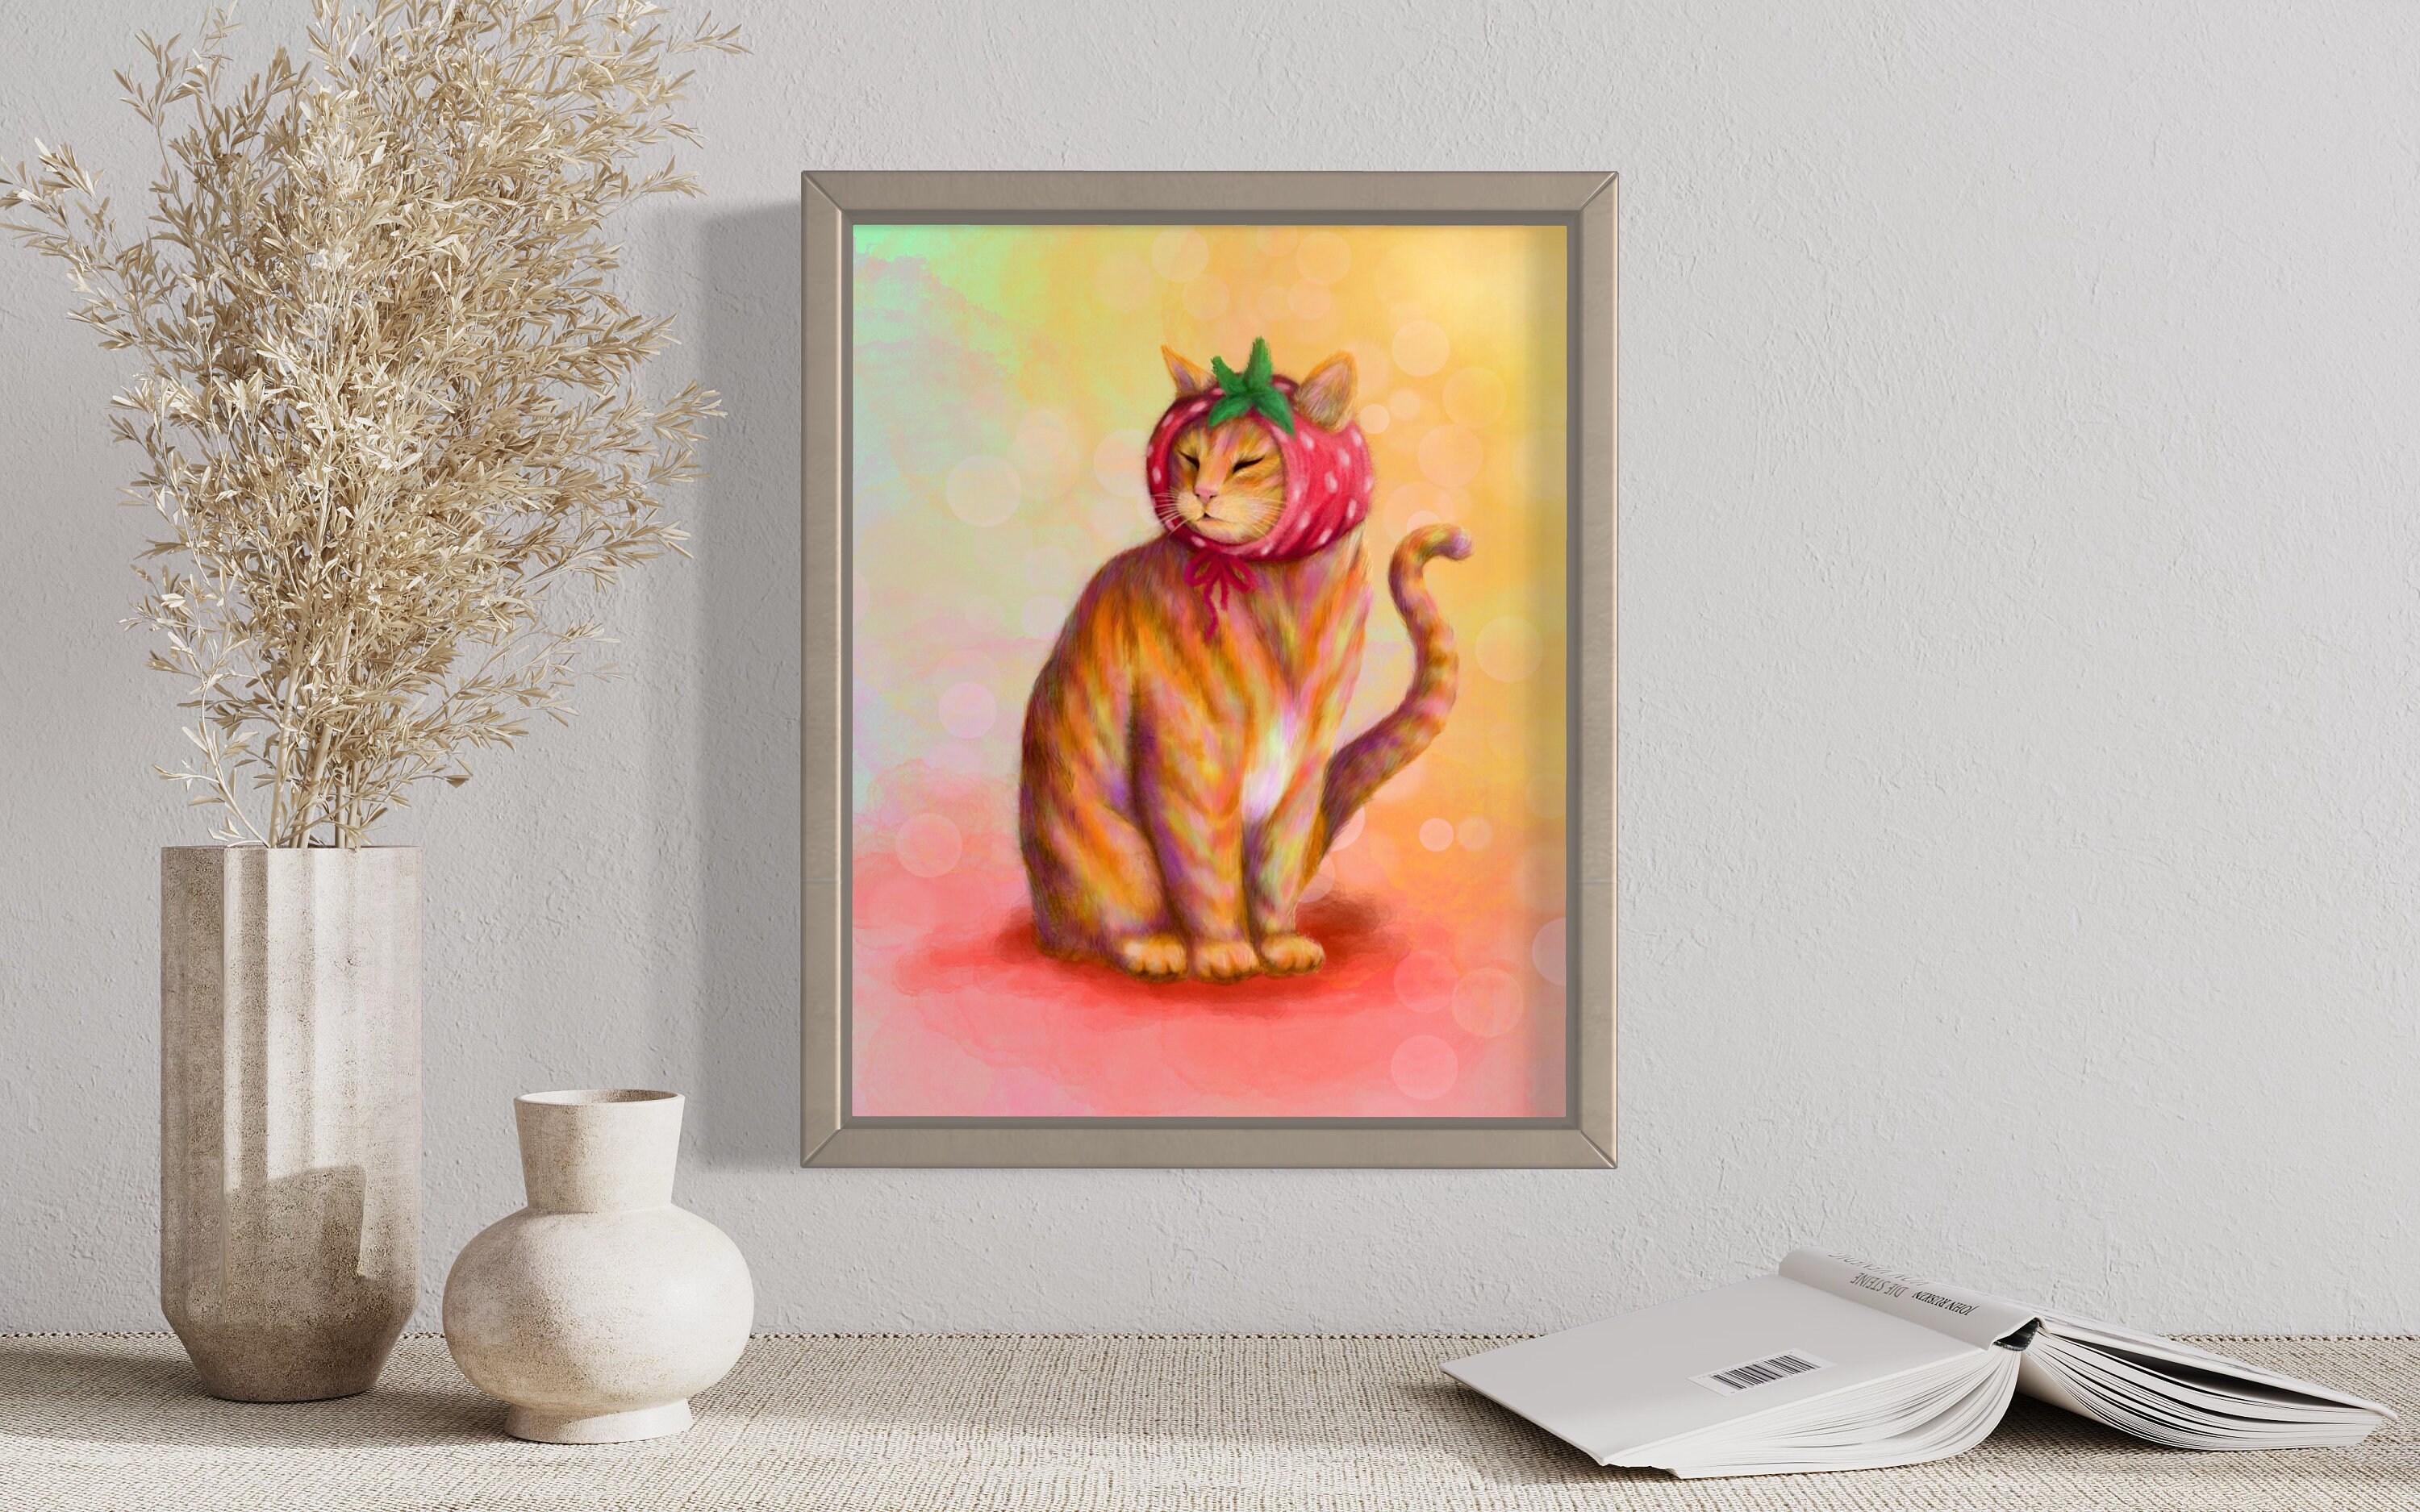 Cat Drinking Strawberry Milk Photographic Print for Sale by